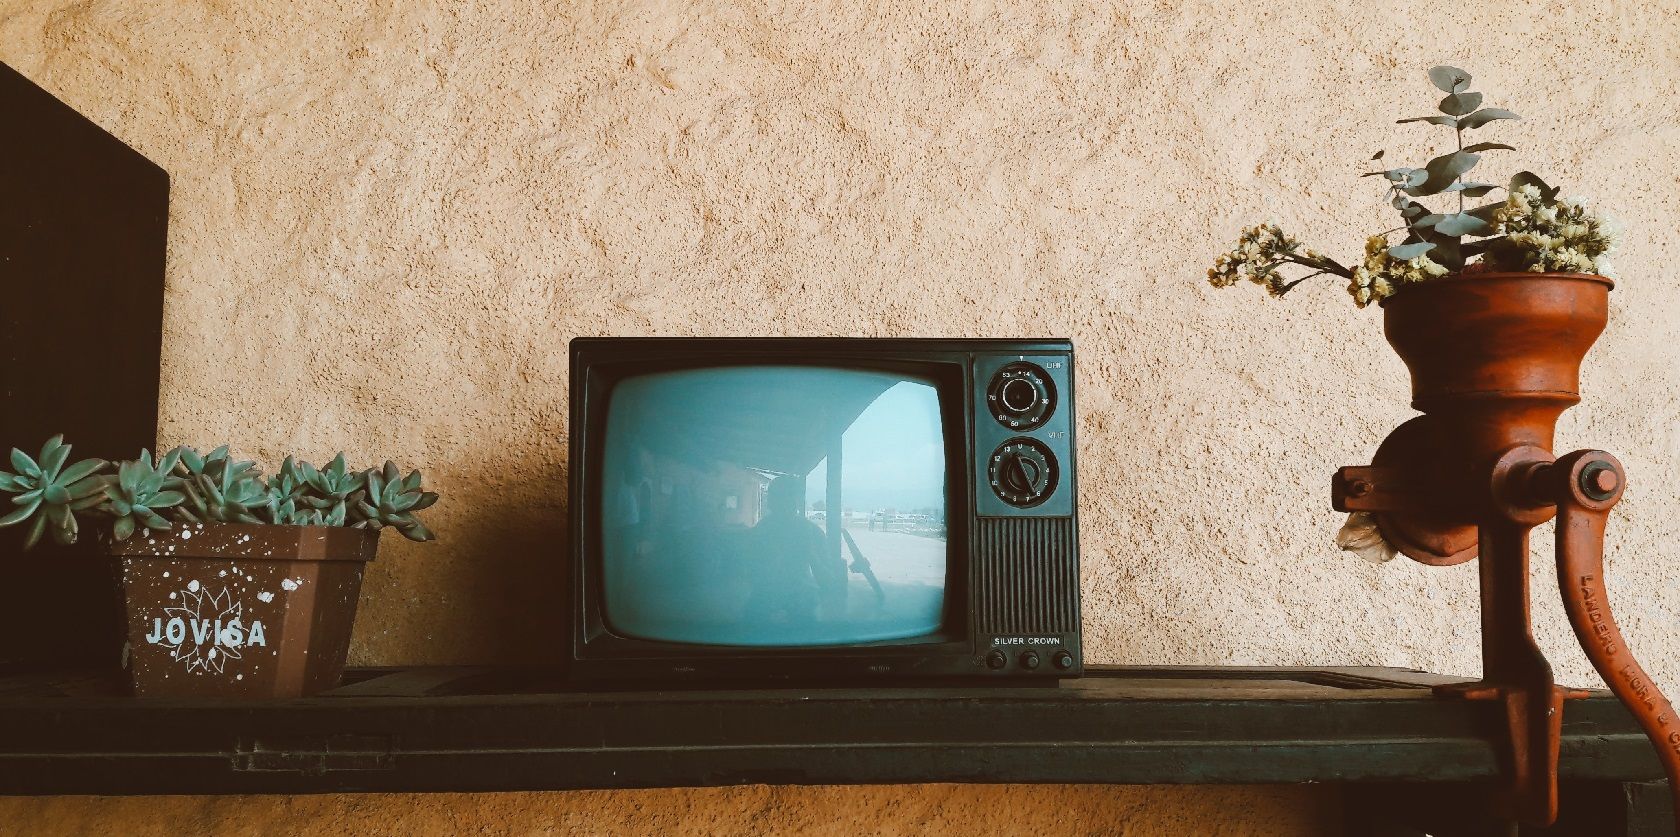 7 Incredible DIY Ideas to Upcycle Old TVs